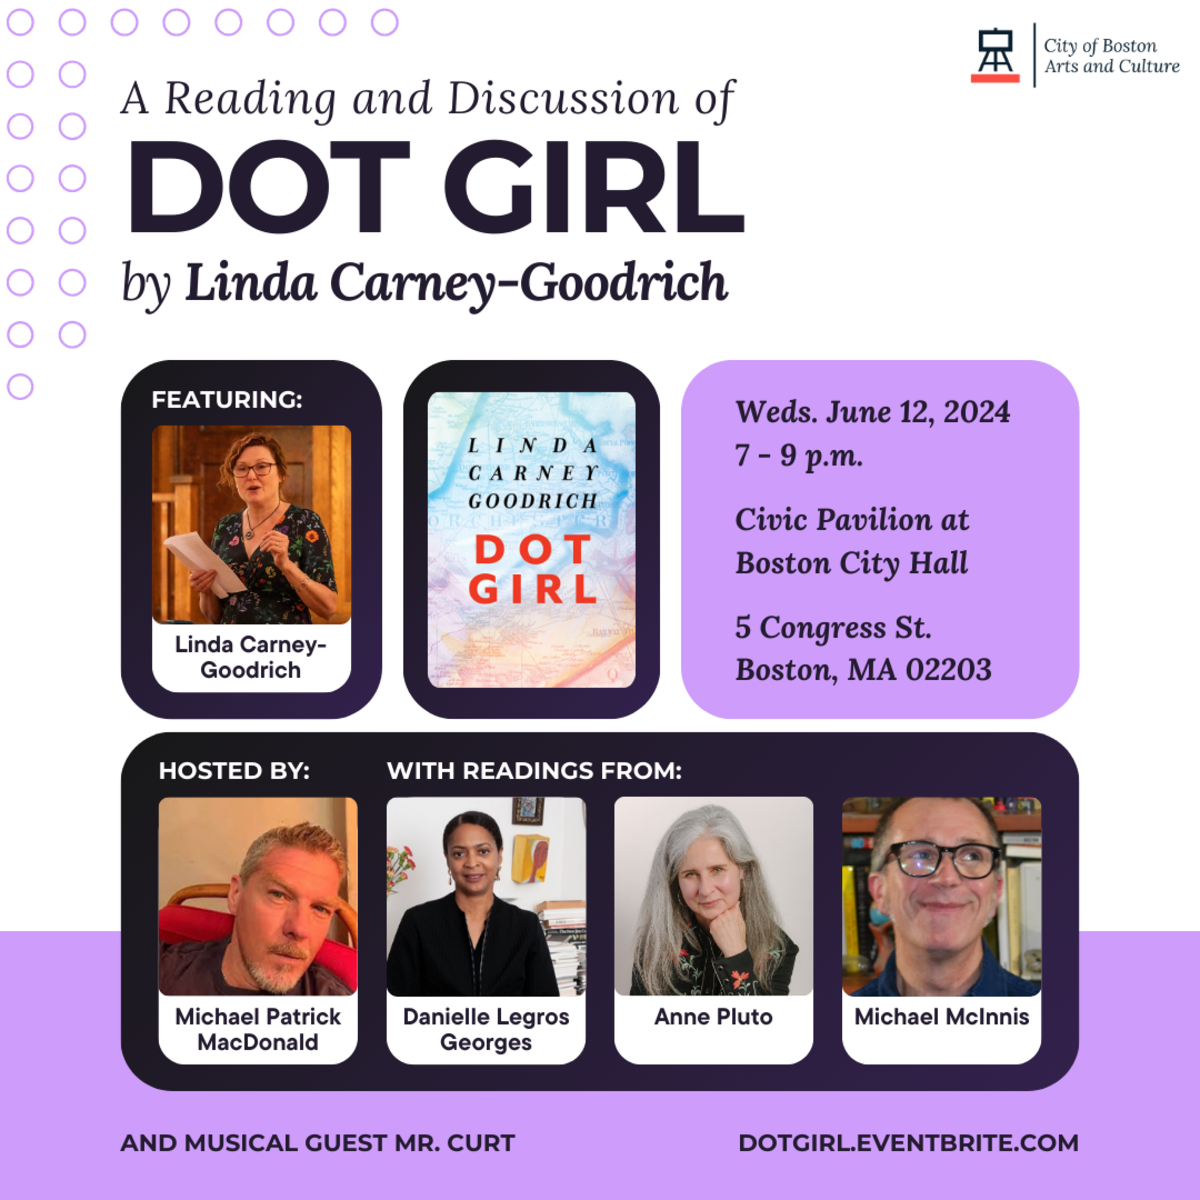 Flyer for "A Reading and Discussion of Dot Girl by Linda Carney-Goodrich"